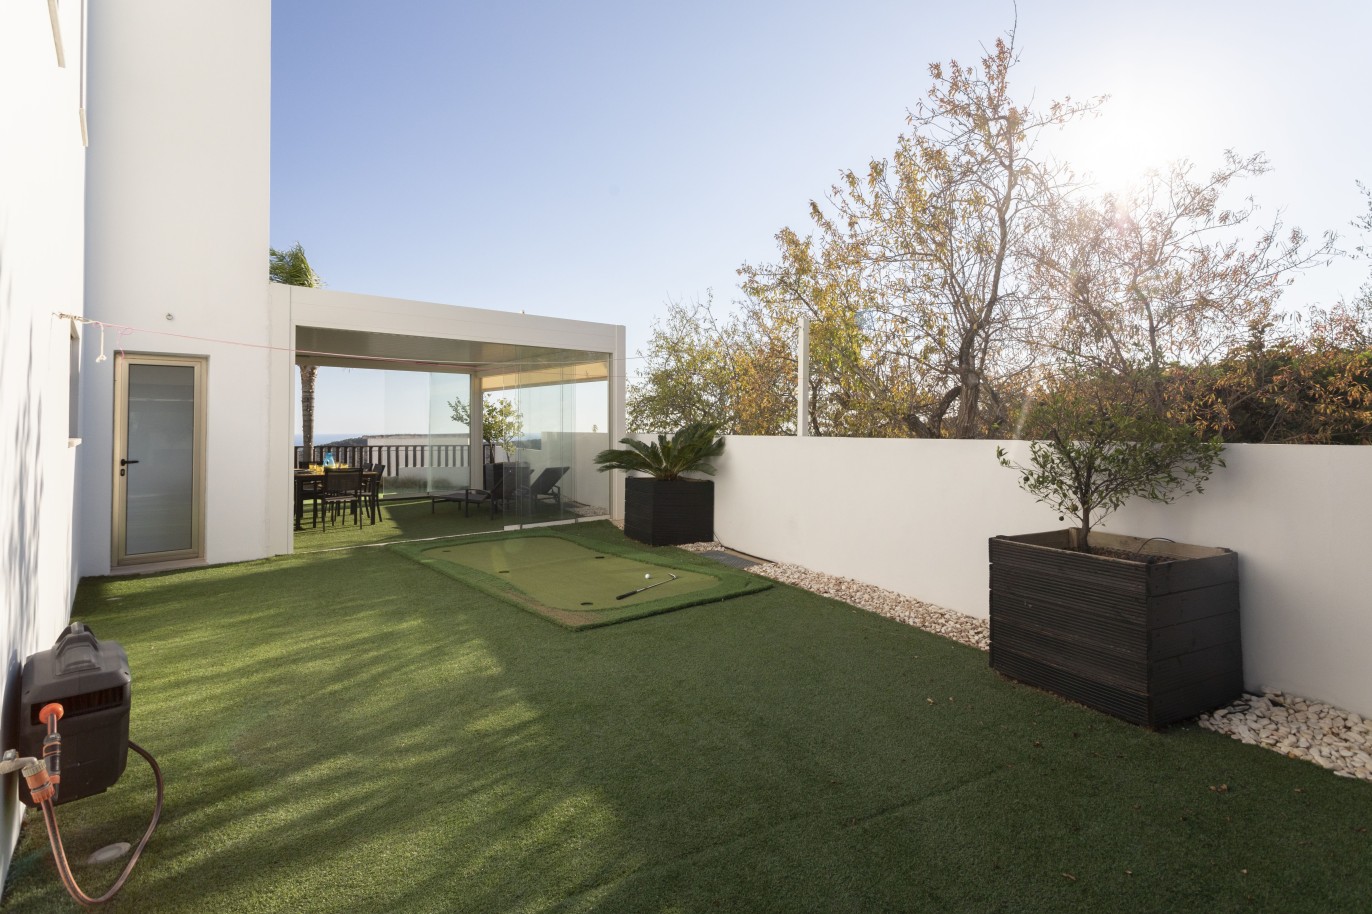 4 bedroom villa with pool and sea view, for sale in Loulé, Algarve_237419